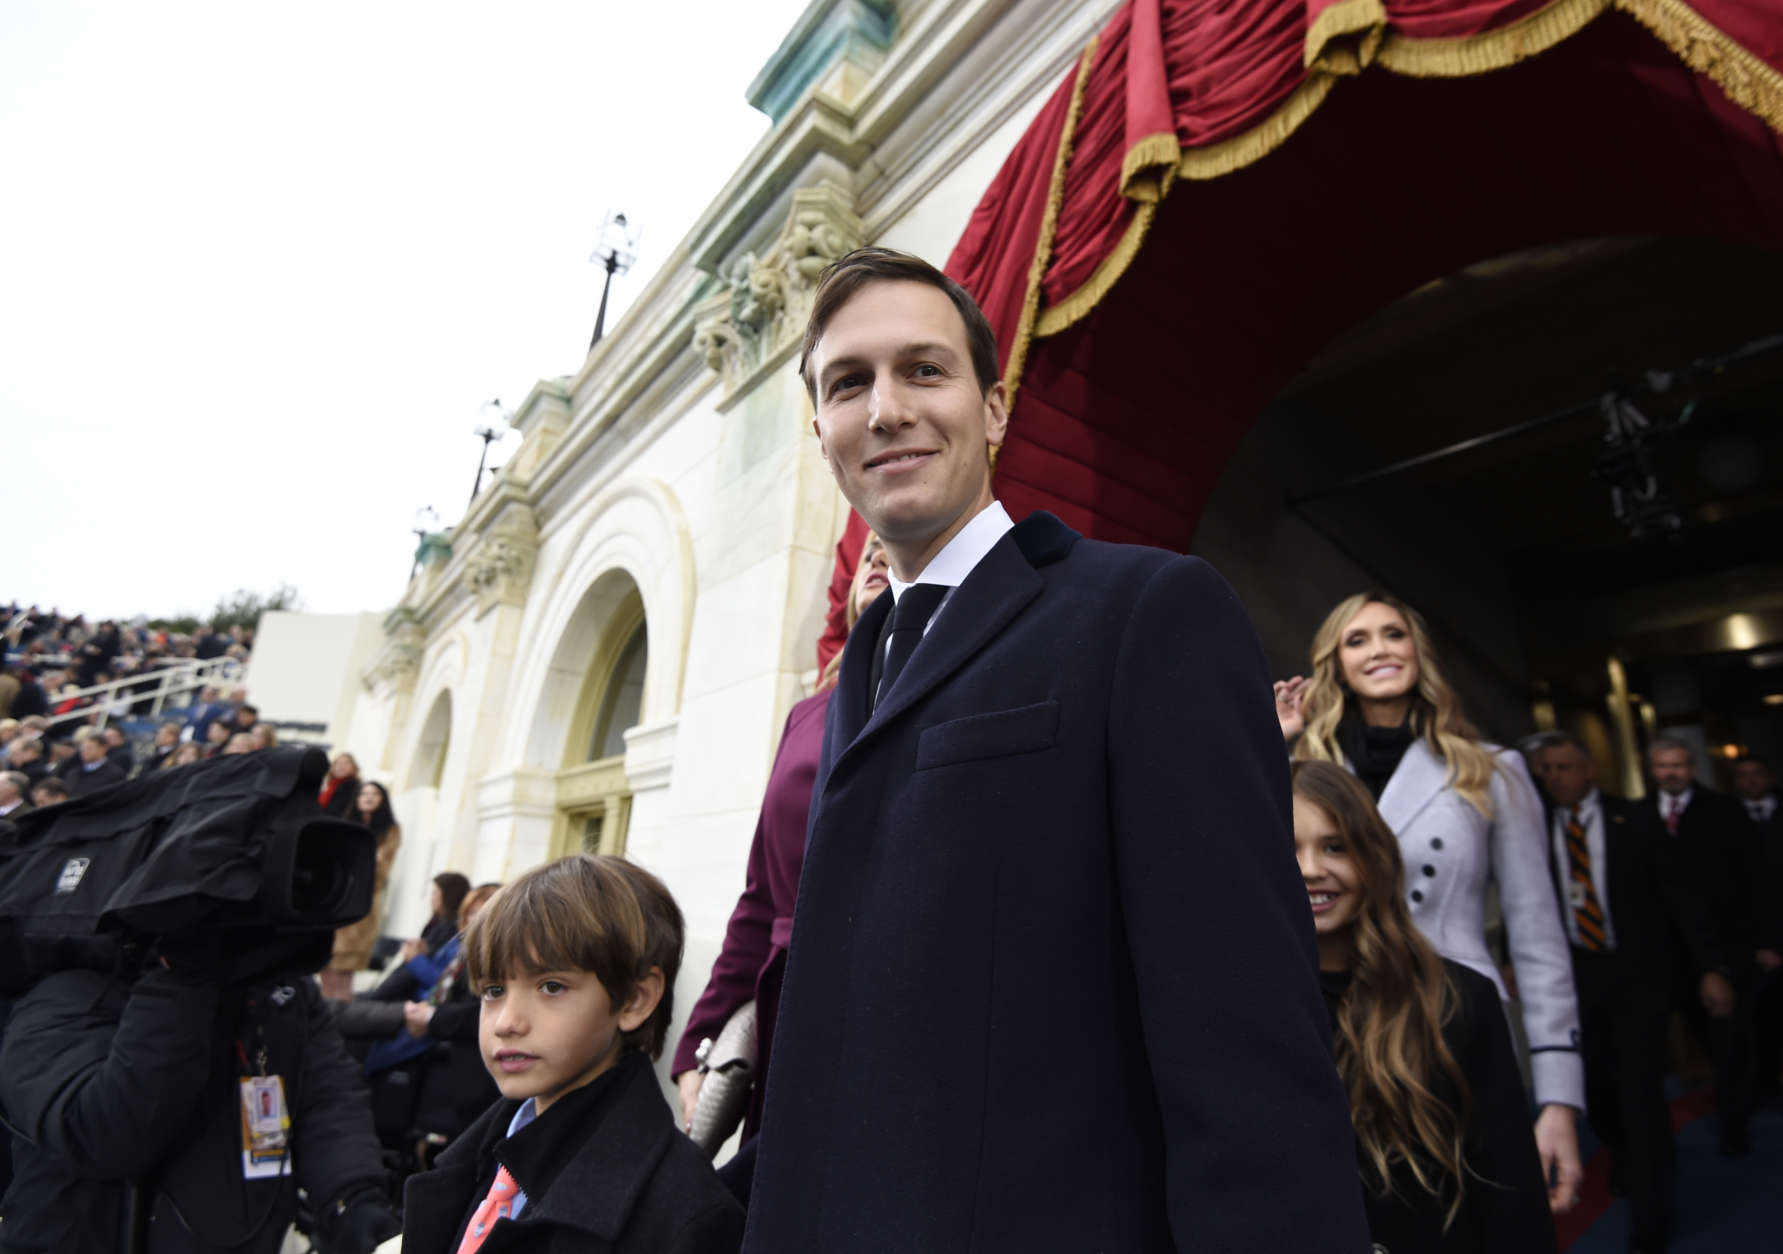 WASHINGTON, DC - JANUARY 20: Jared Kushner, senior advisor to President-elect Donald Trump, arrives for the Presidential Inauguration at the US Capitol on January 20, 2017 in Washington, DC. Donald J. Trump will become the 45th president of the United States today.  (Photo by Saul Loeb - Pool/Getty Images)